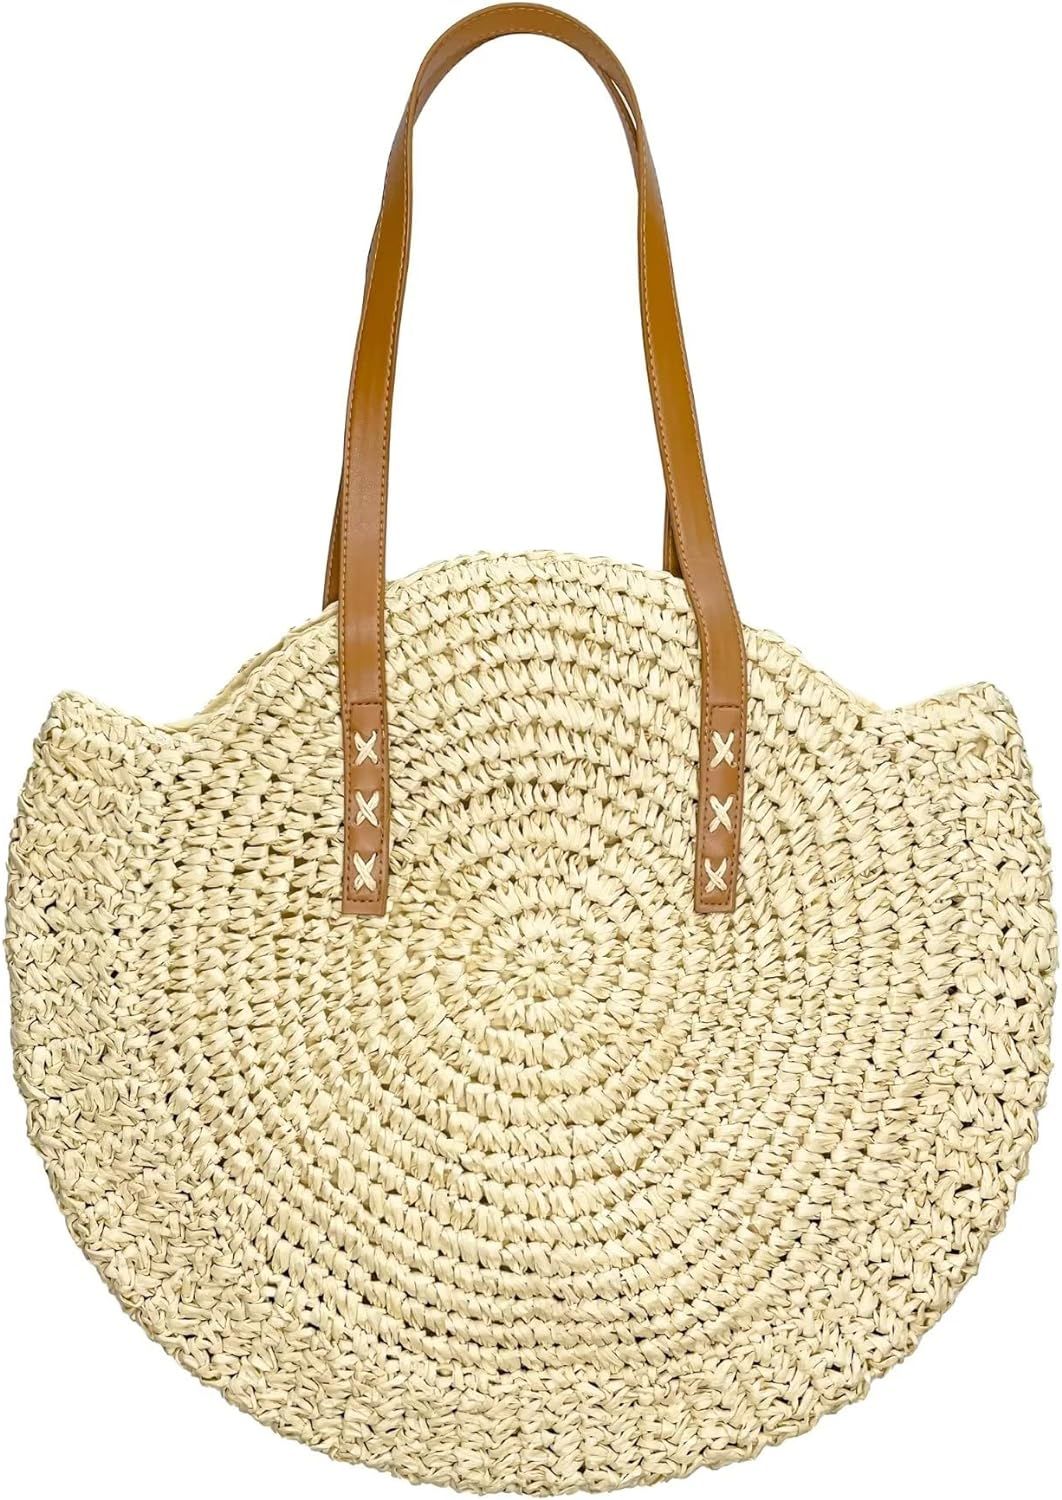 Straw Bag Handwoven Beach Bags Corn Straw Tote Woven Shoulder Bag For Women | Amazon (US)